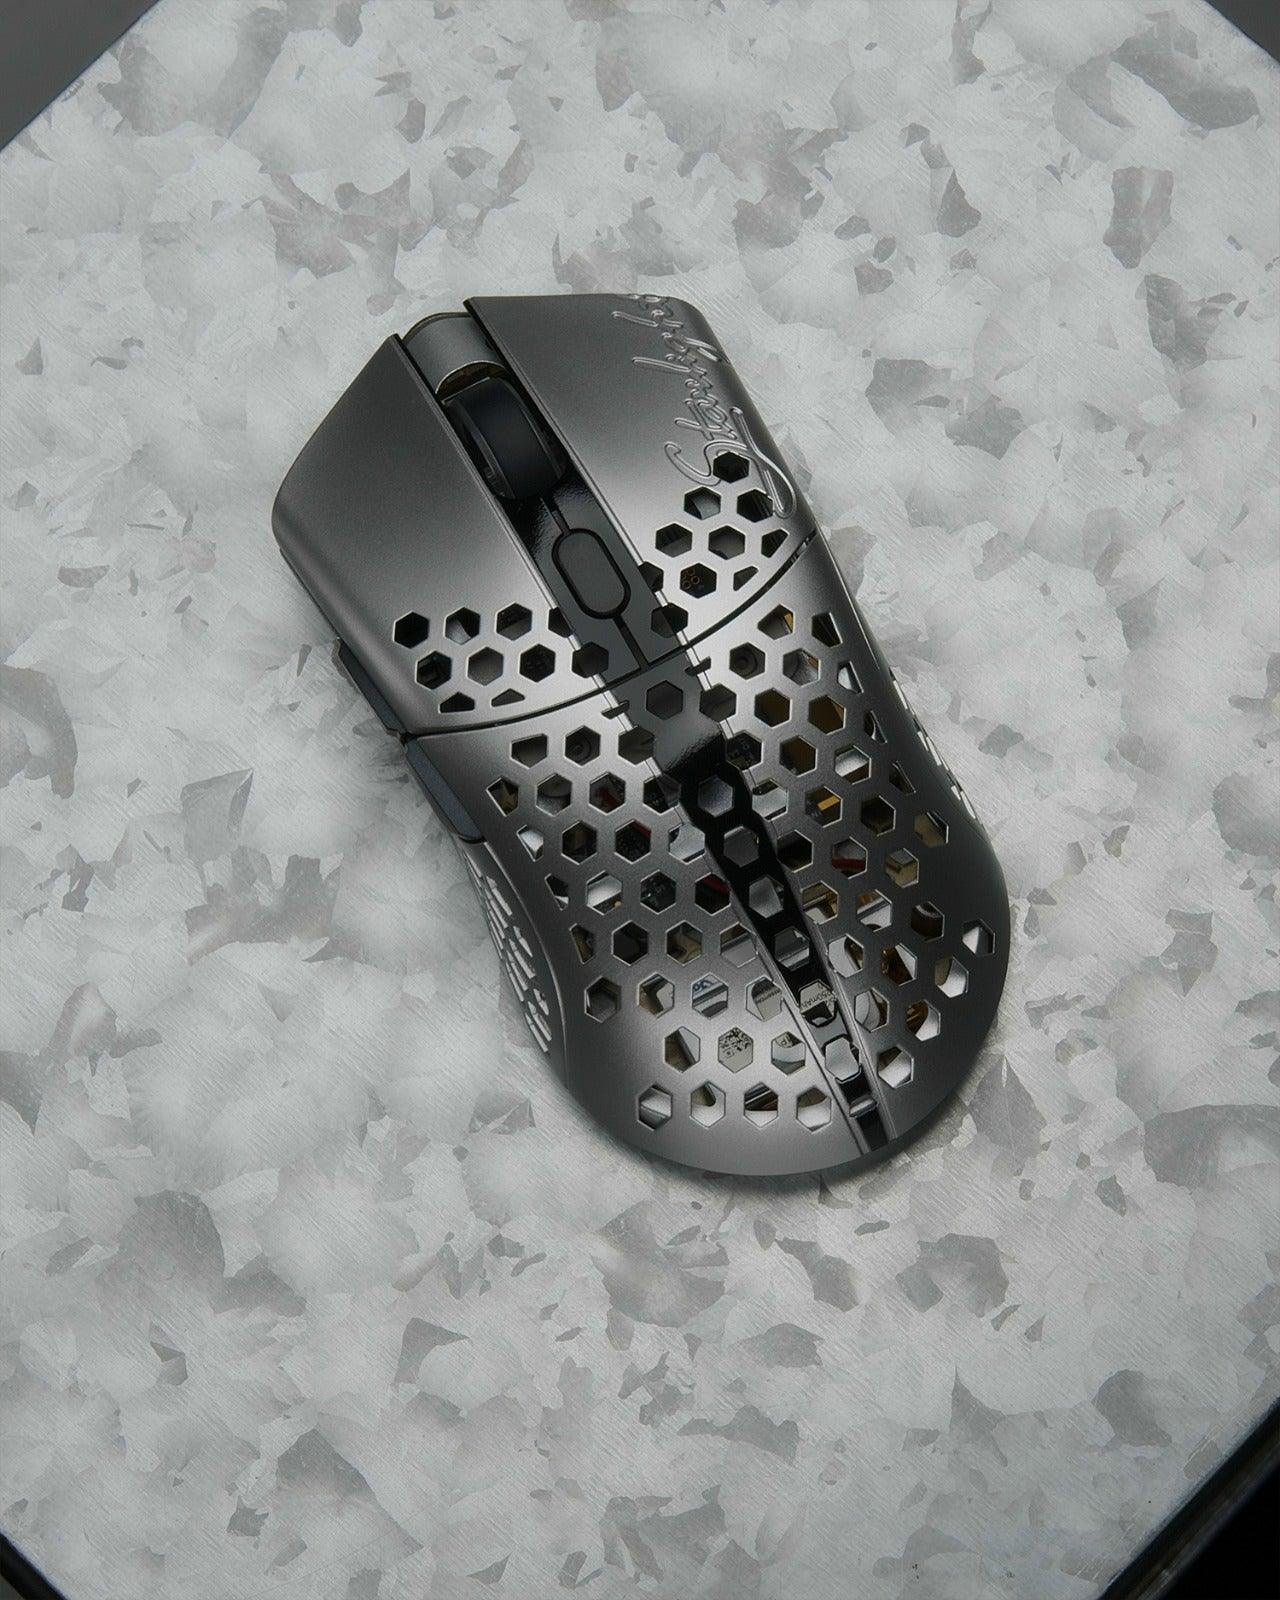 Finalmouse Starlight Pro TenZ Gaming Mouse - Small